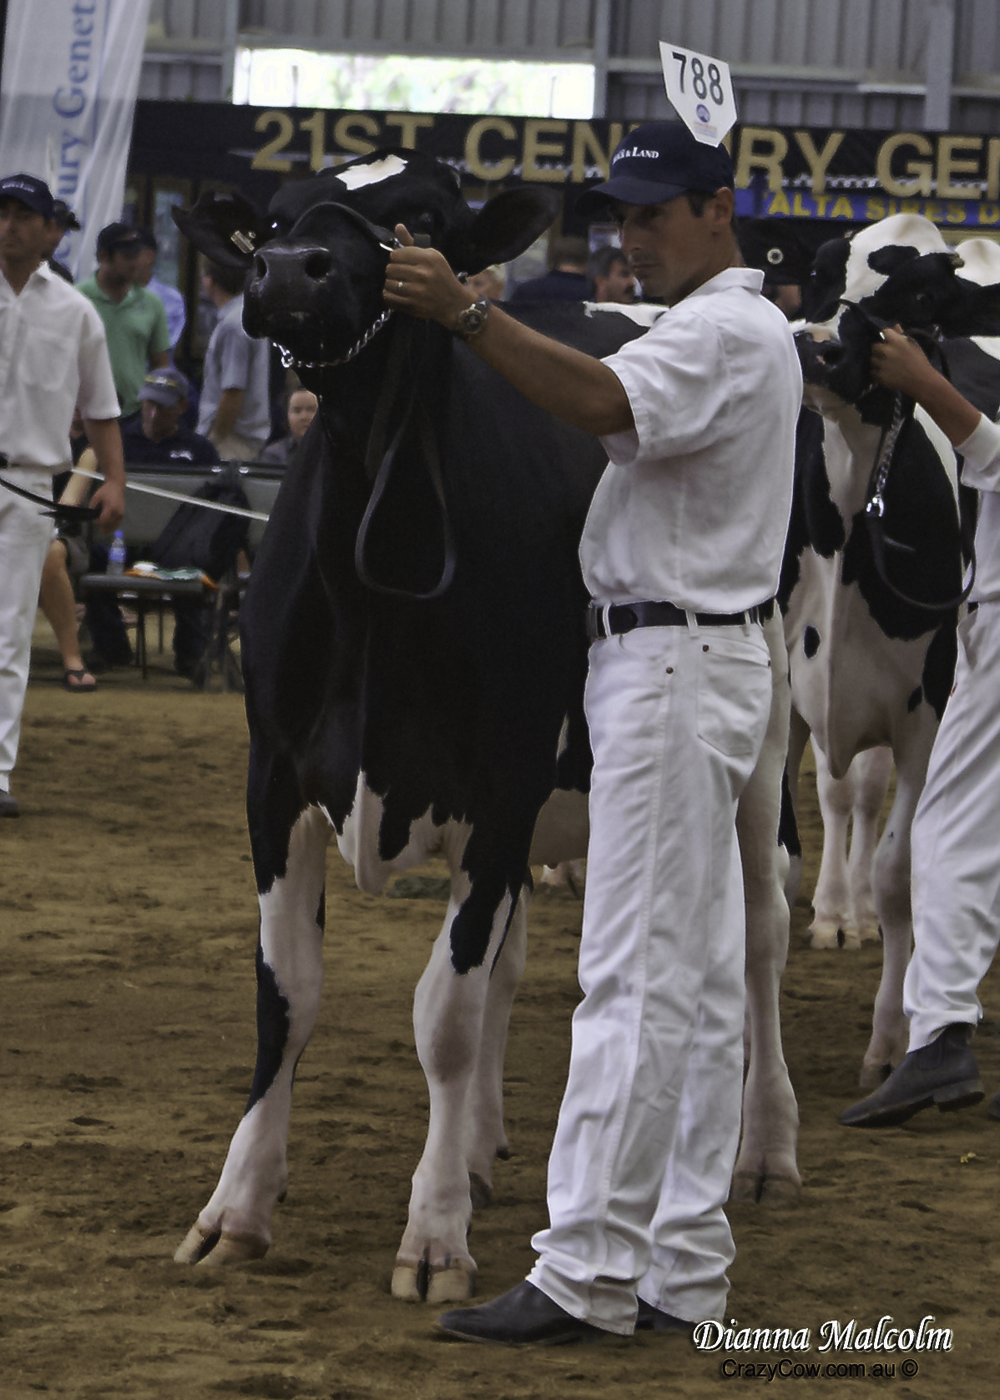 Bluechip Dundee Connie 2 VG 89 (Max Score) 3rd S2 in-milk IDW 2012 and 5th S3 in-milk 2013